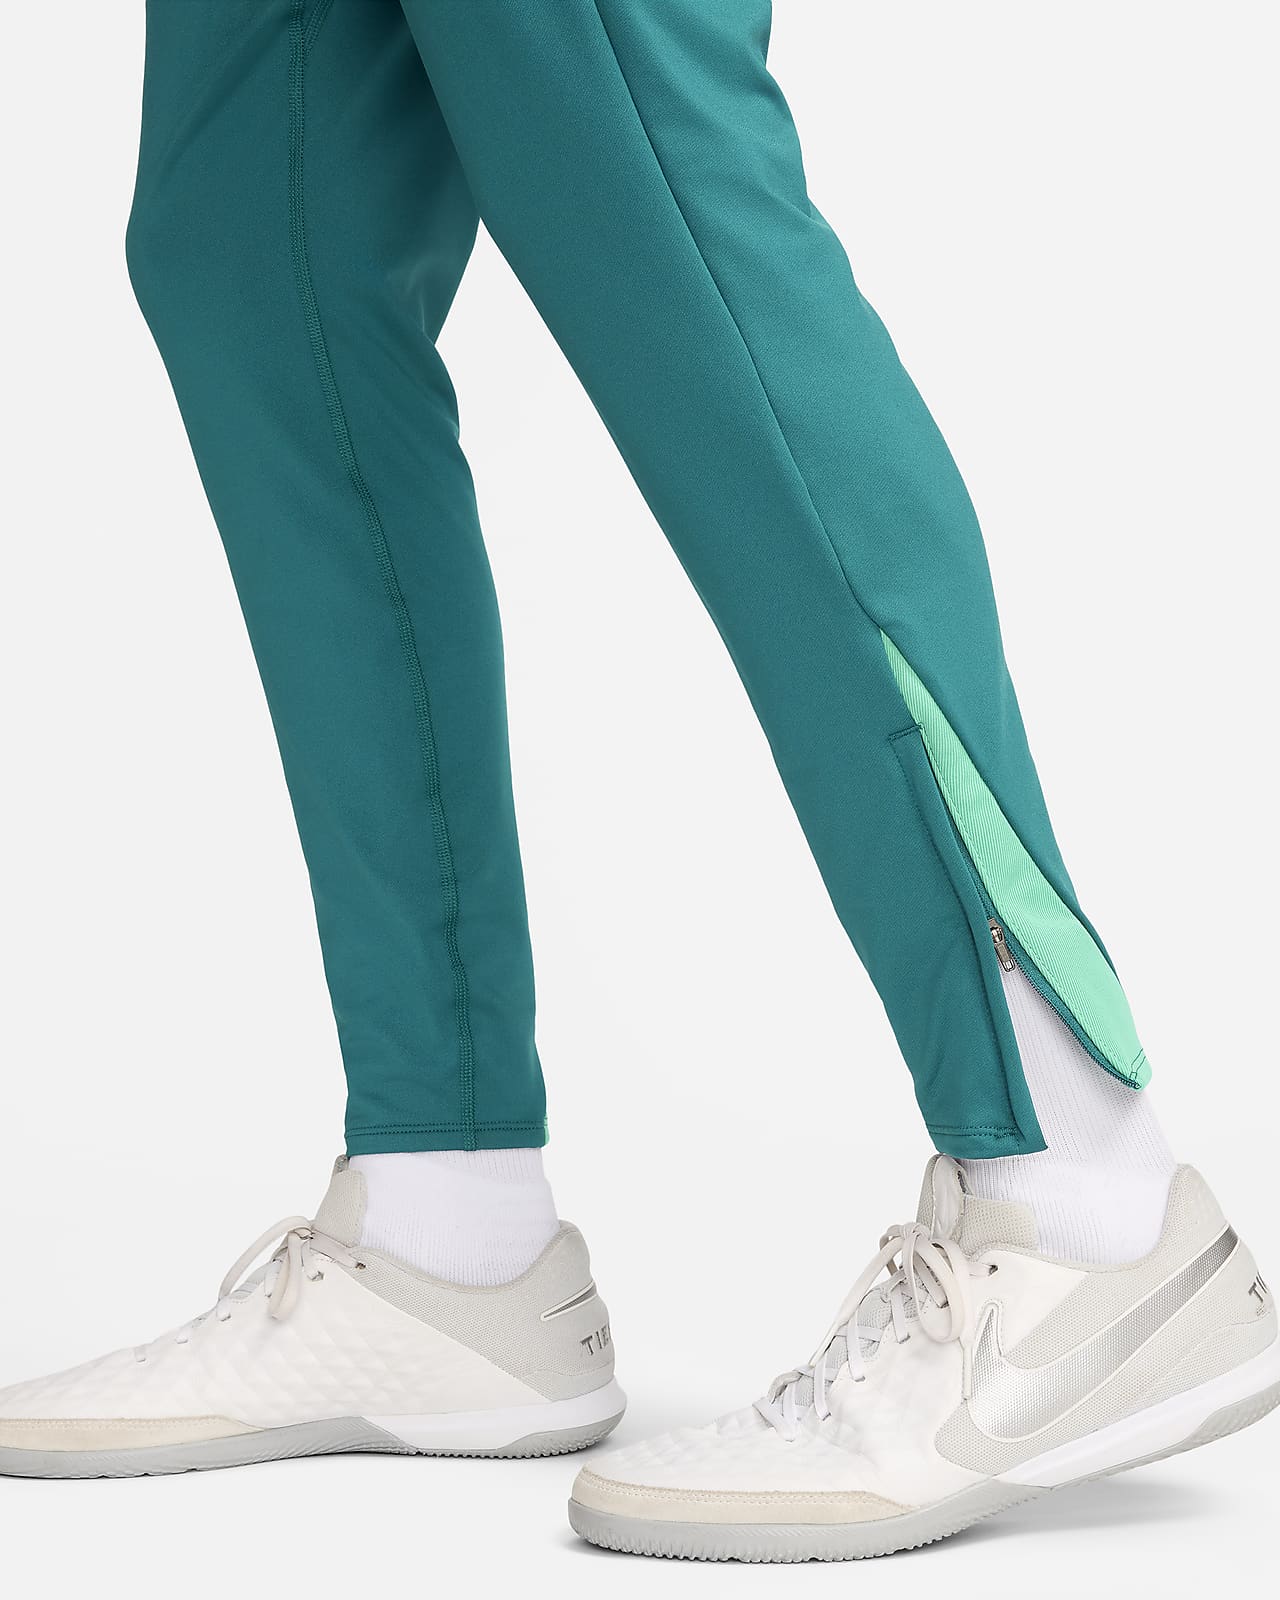 White Trousers & Tights. Nike CA